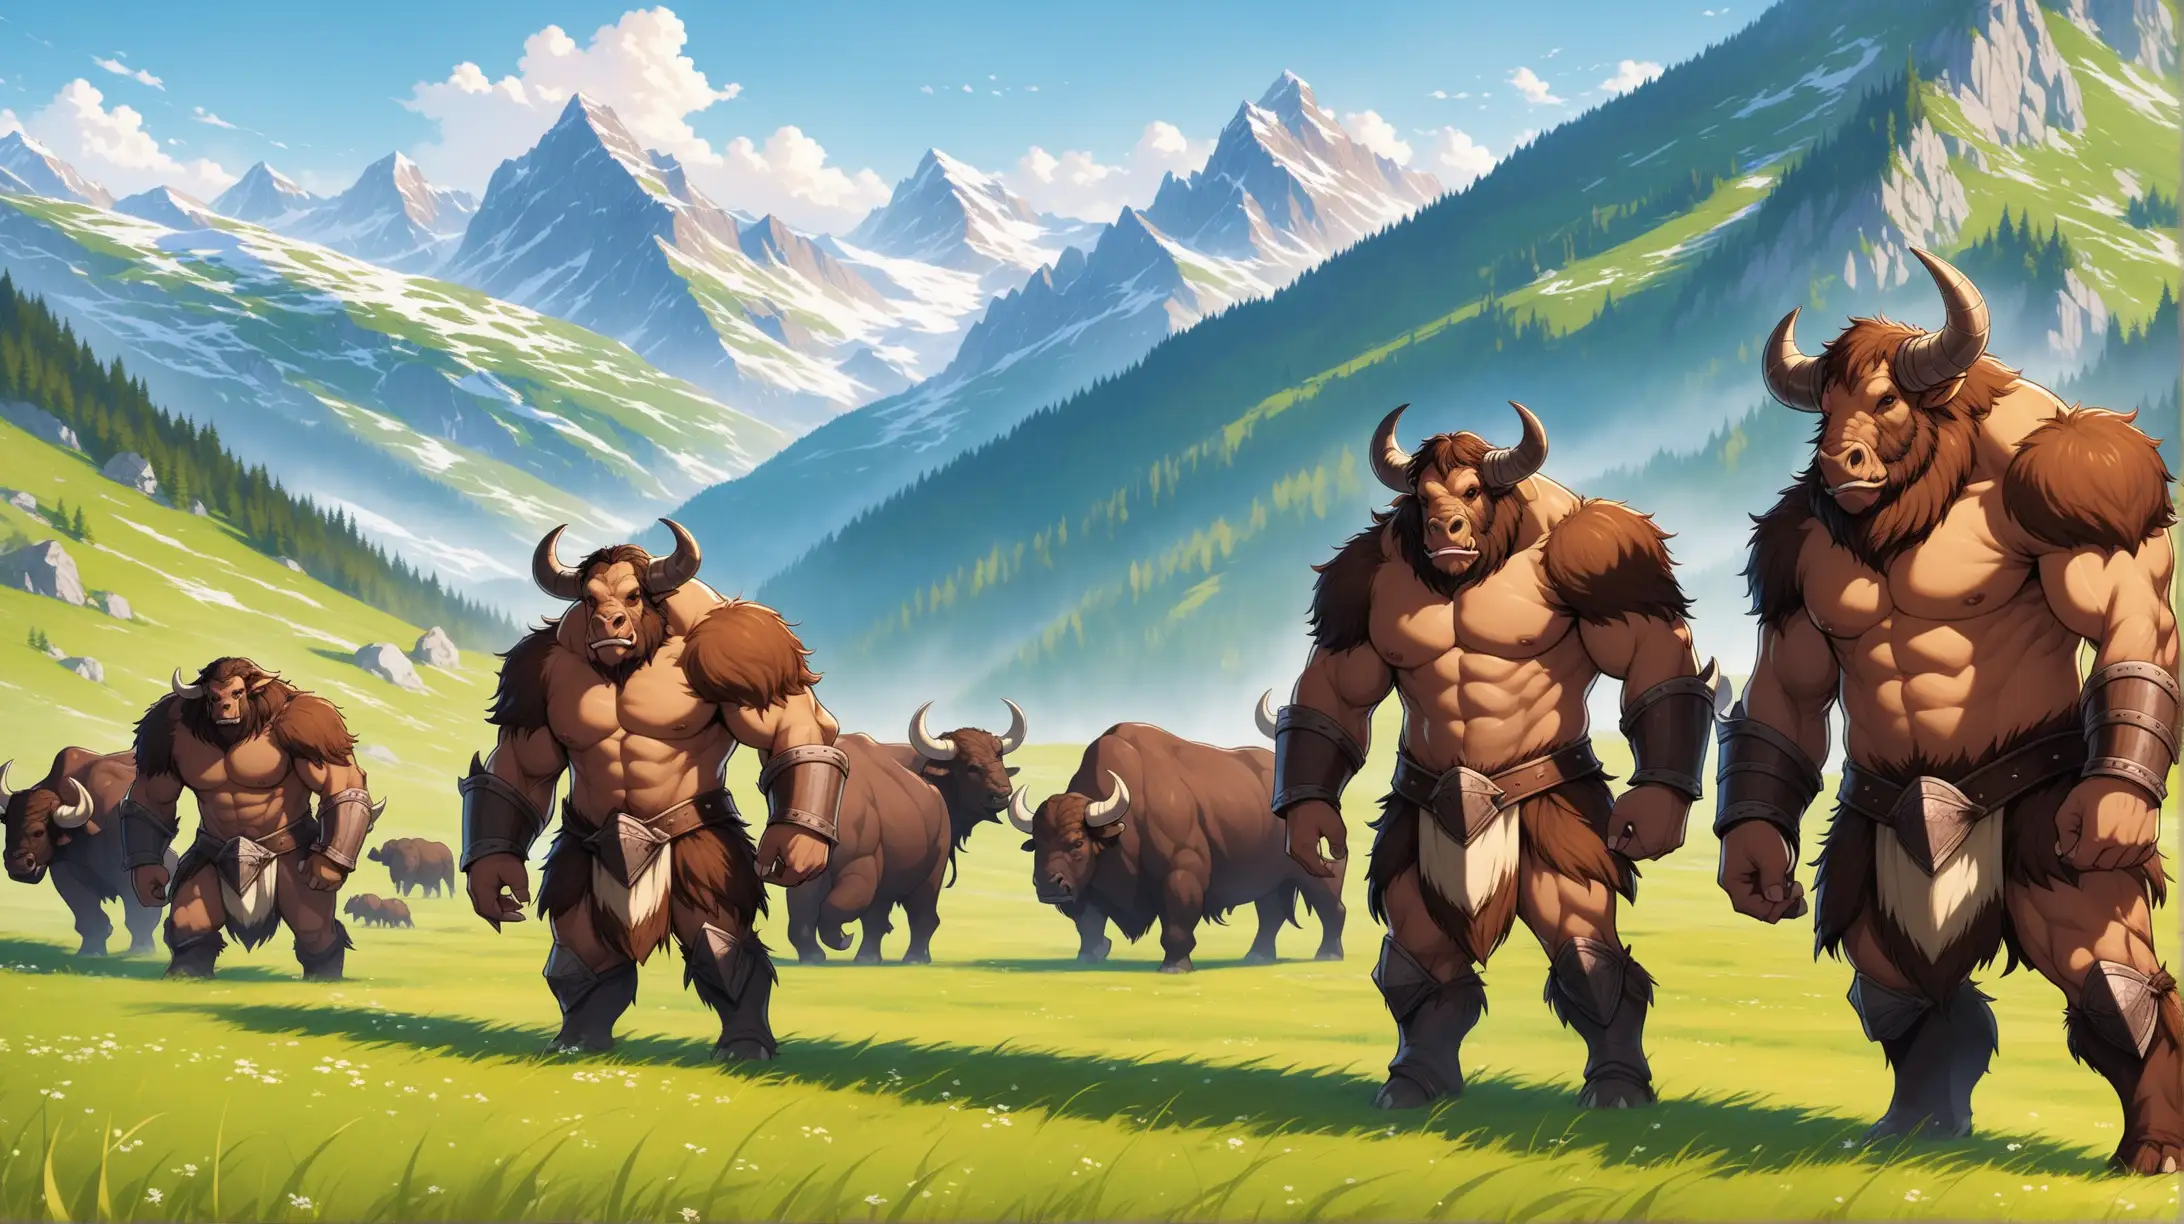 group of minotaurs, male and female, various fur colors, mountain pasture, Medieval fantasy